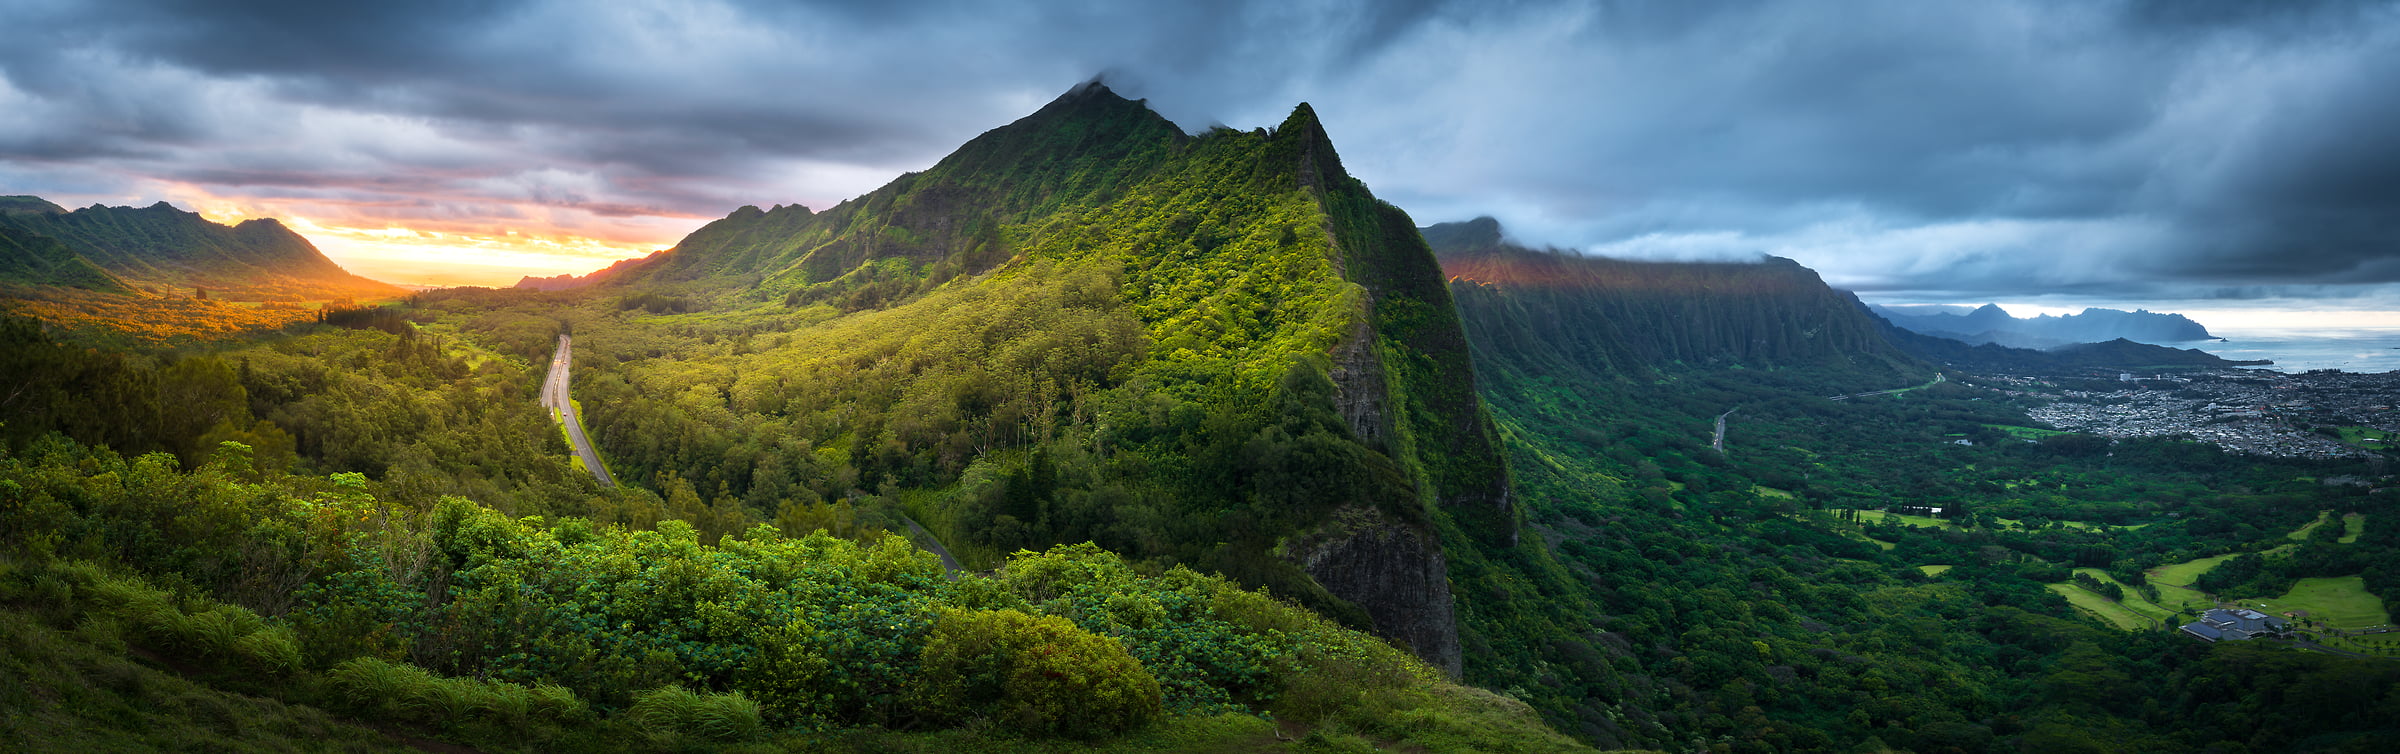 228 megapixels! A very high resolution, large-format VAST photo print of a landscape in Hawaii at sunset; photograph created by Jeff Lewis in Honolulu, Hawaii.